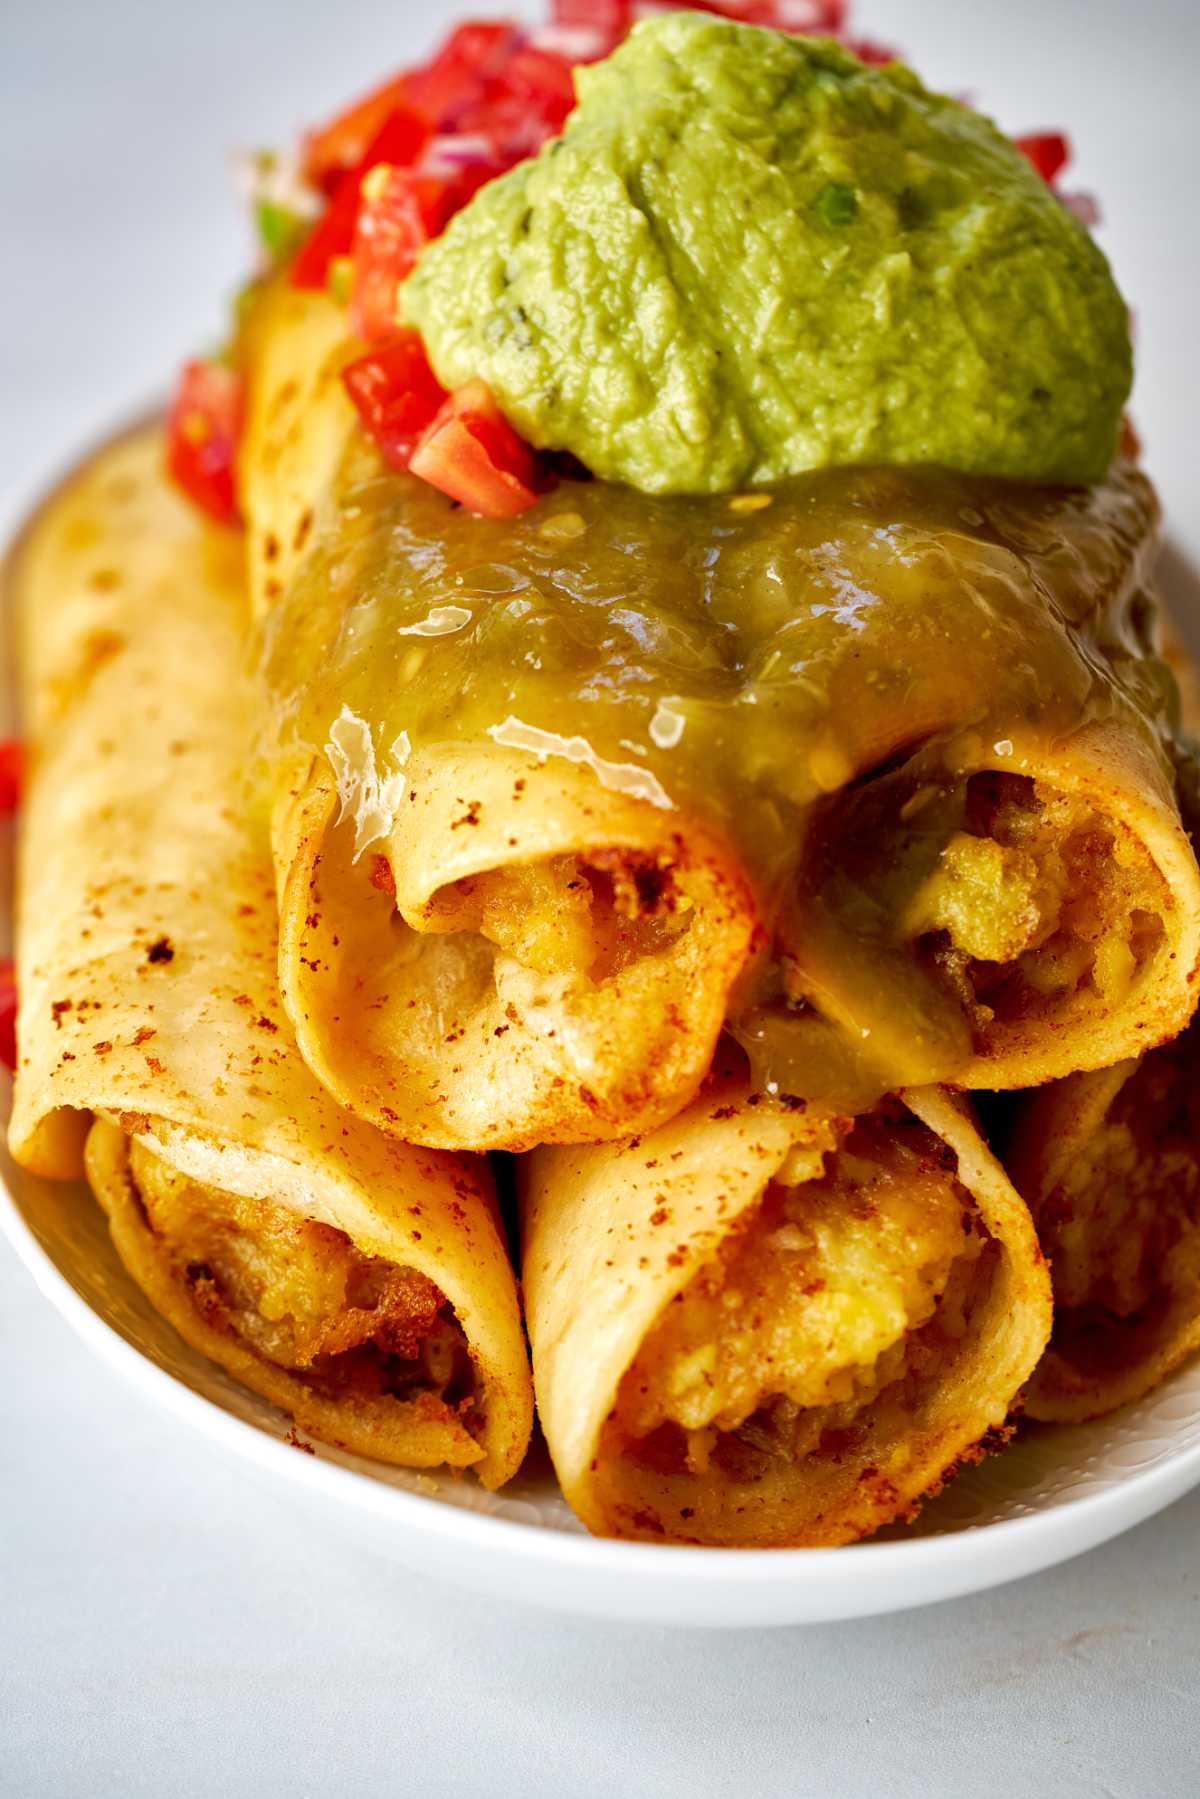 A stack of rolled tacos with guacamole and salsa.